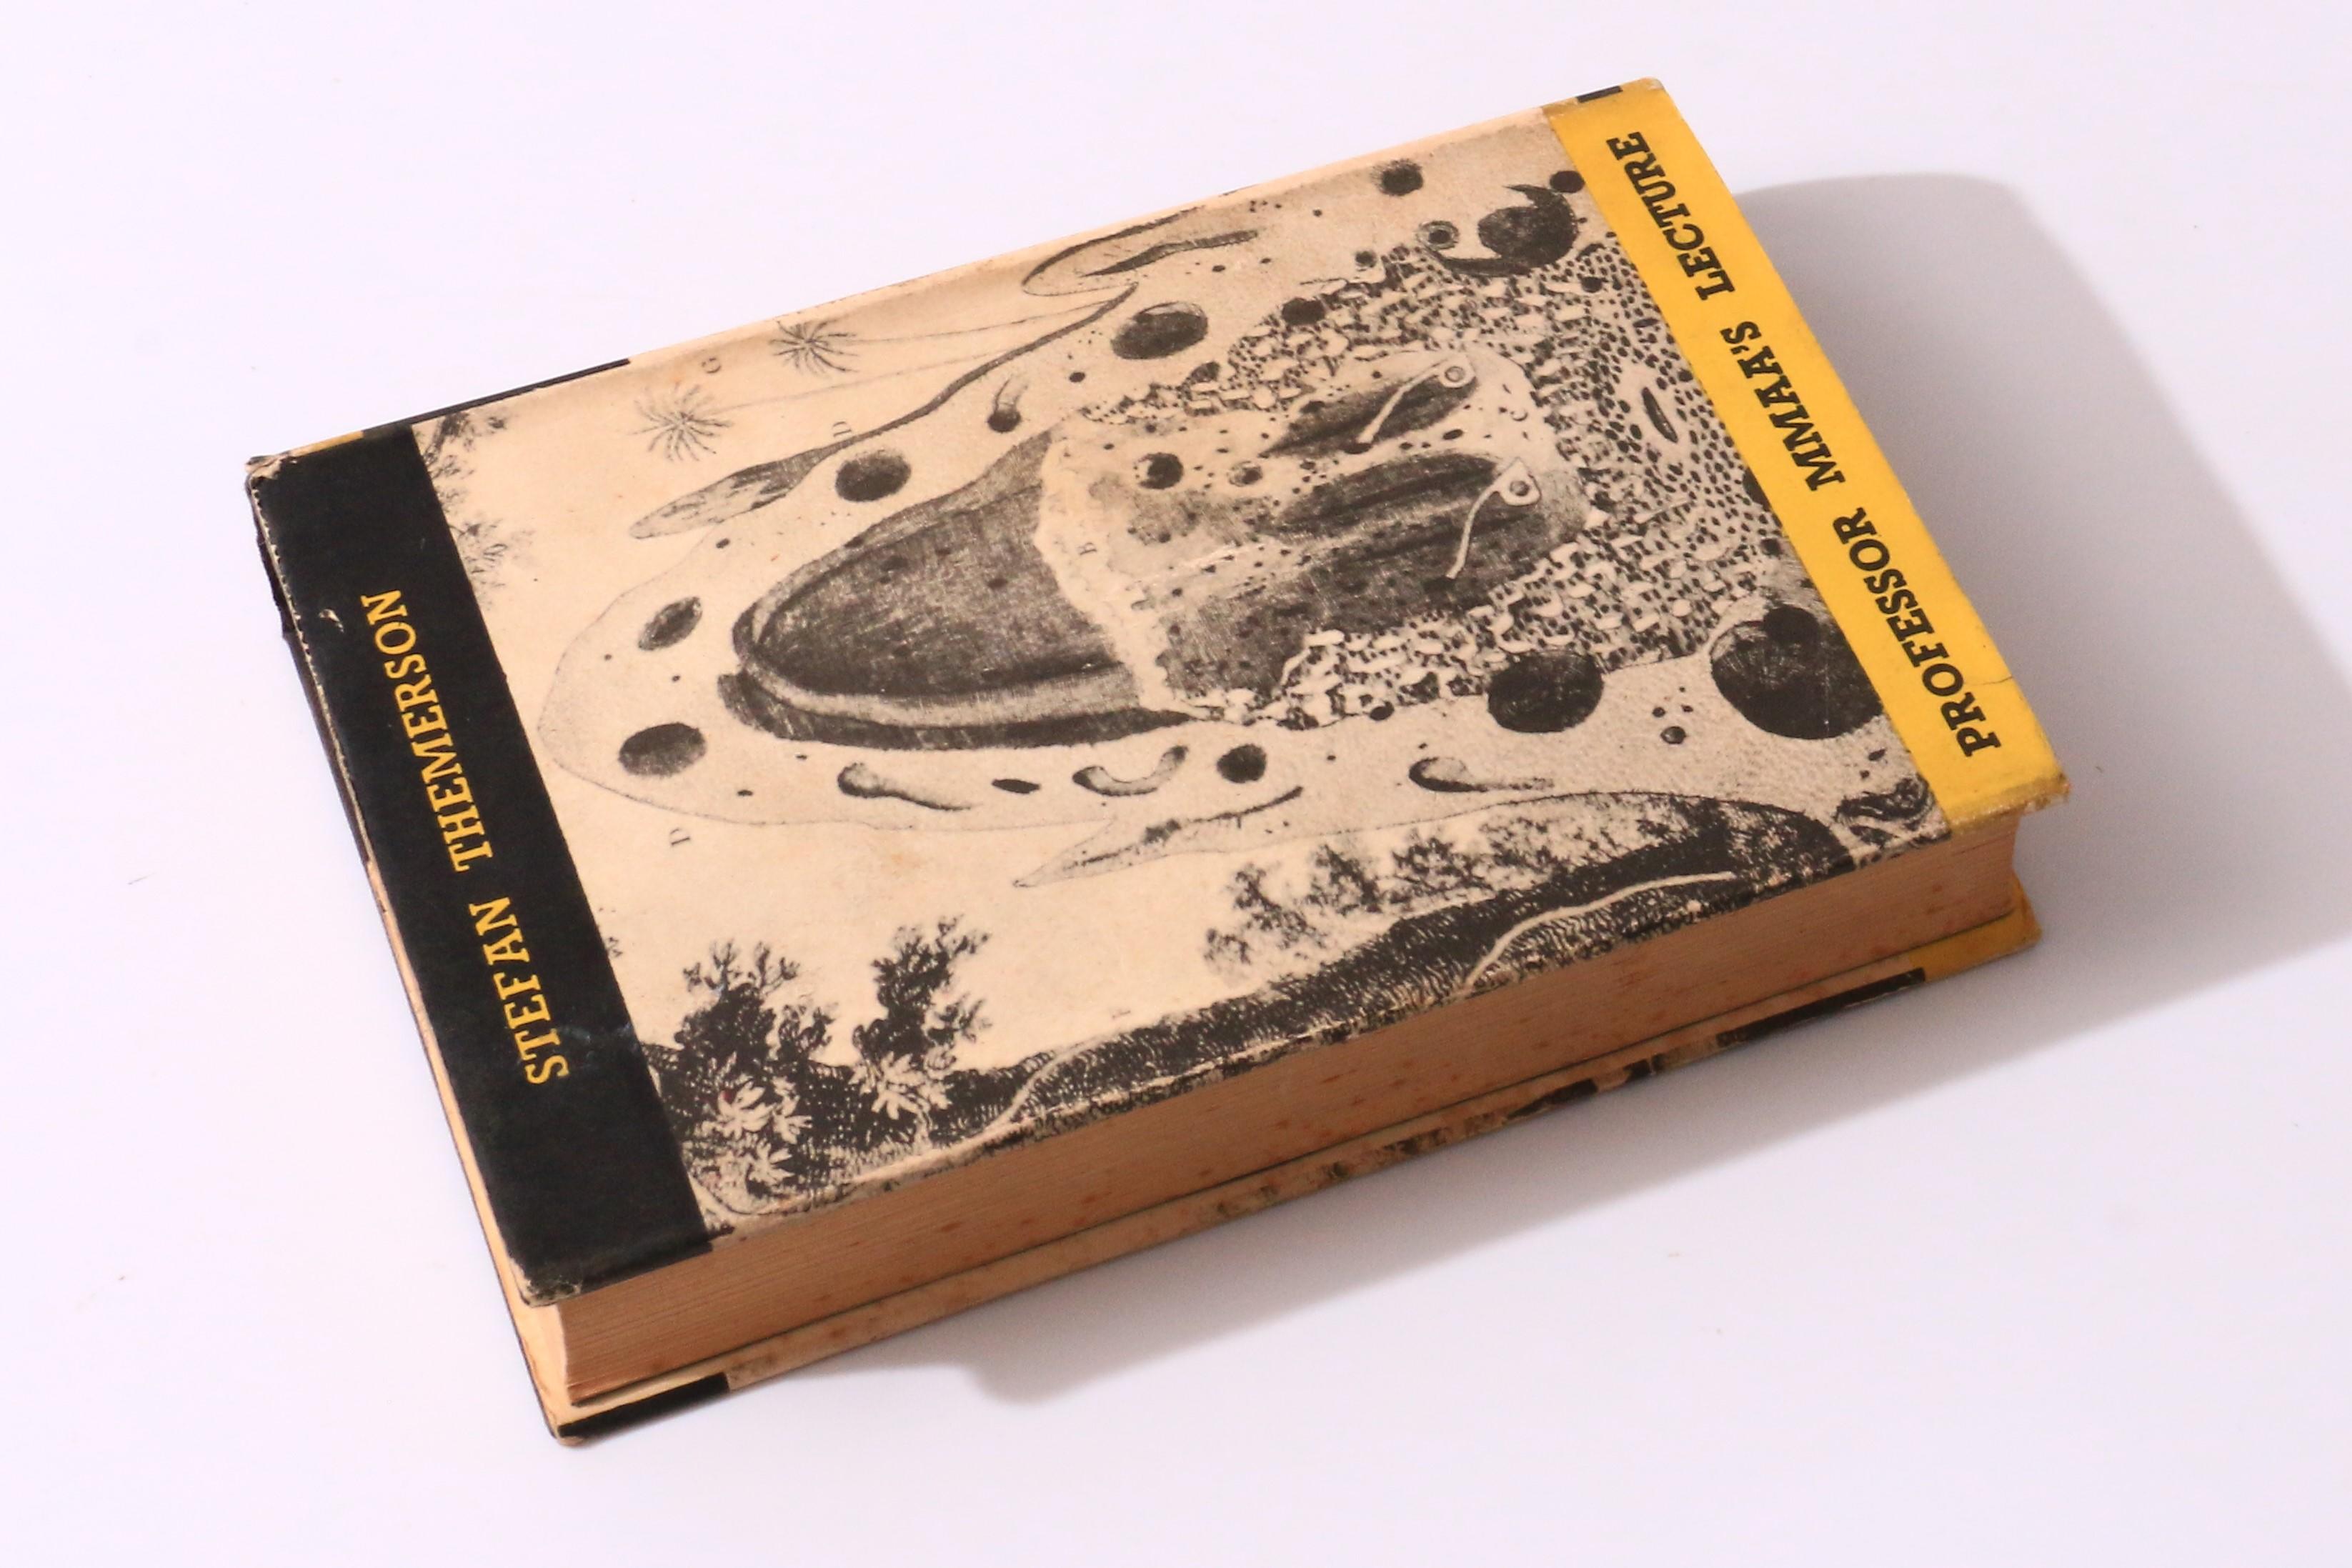 Stefan Thermerson - Professor Mmaa's Lecture - Gaberbocchus, 1953, First Edition.